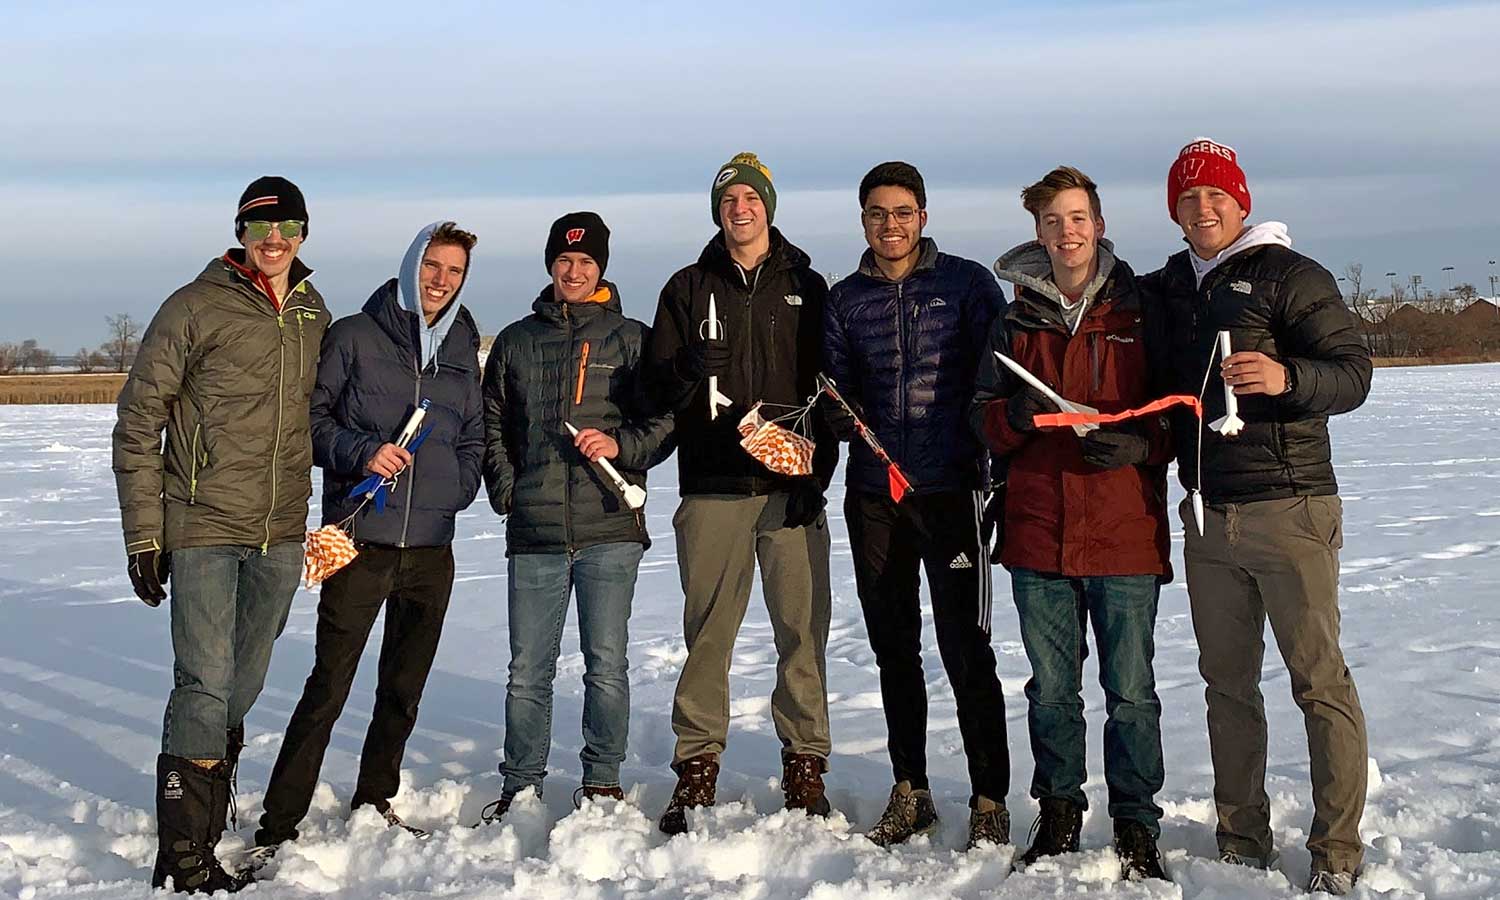 2020 Midwest Rocket Launch group perfecting model rocket building techniques, winter 2020